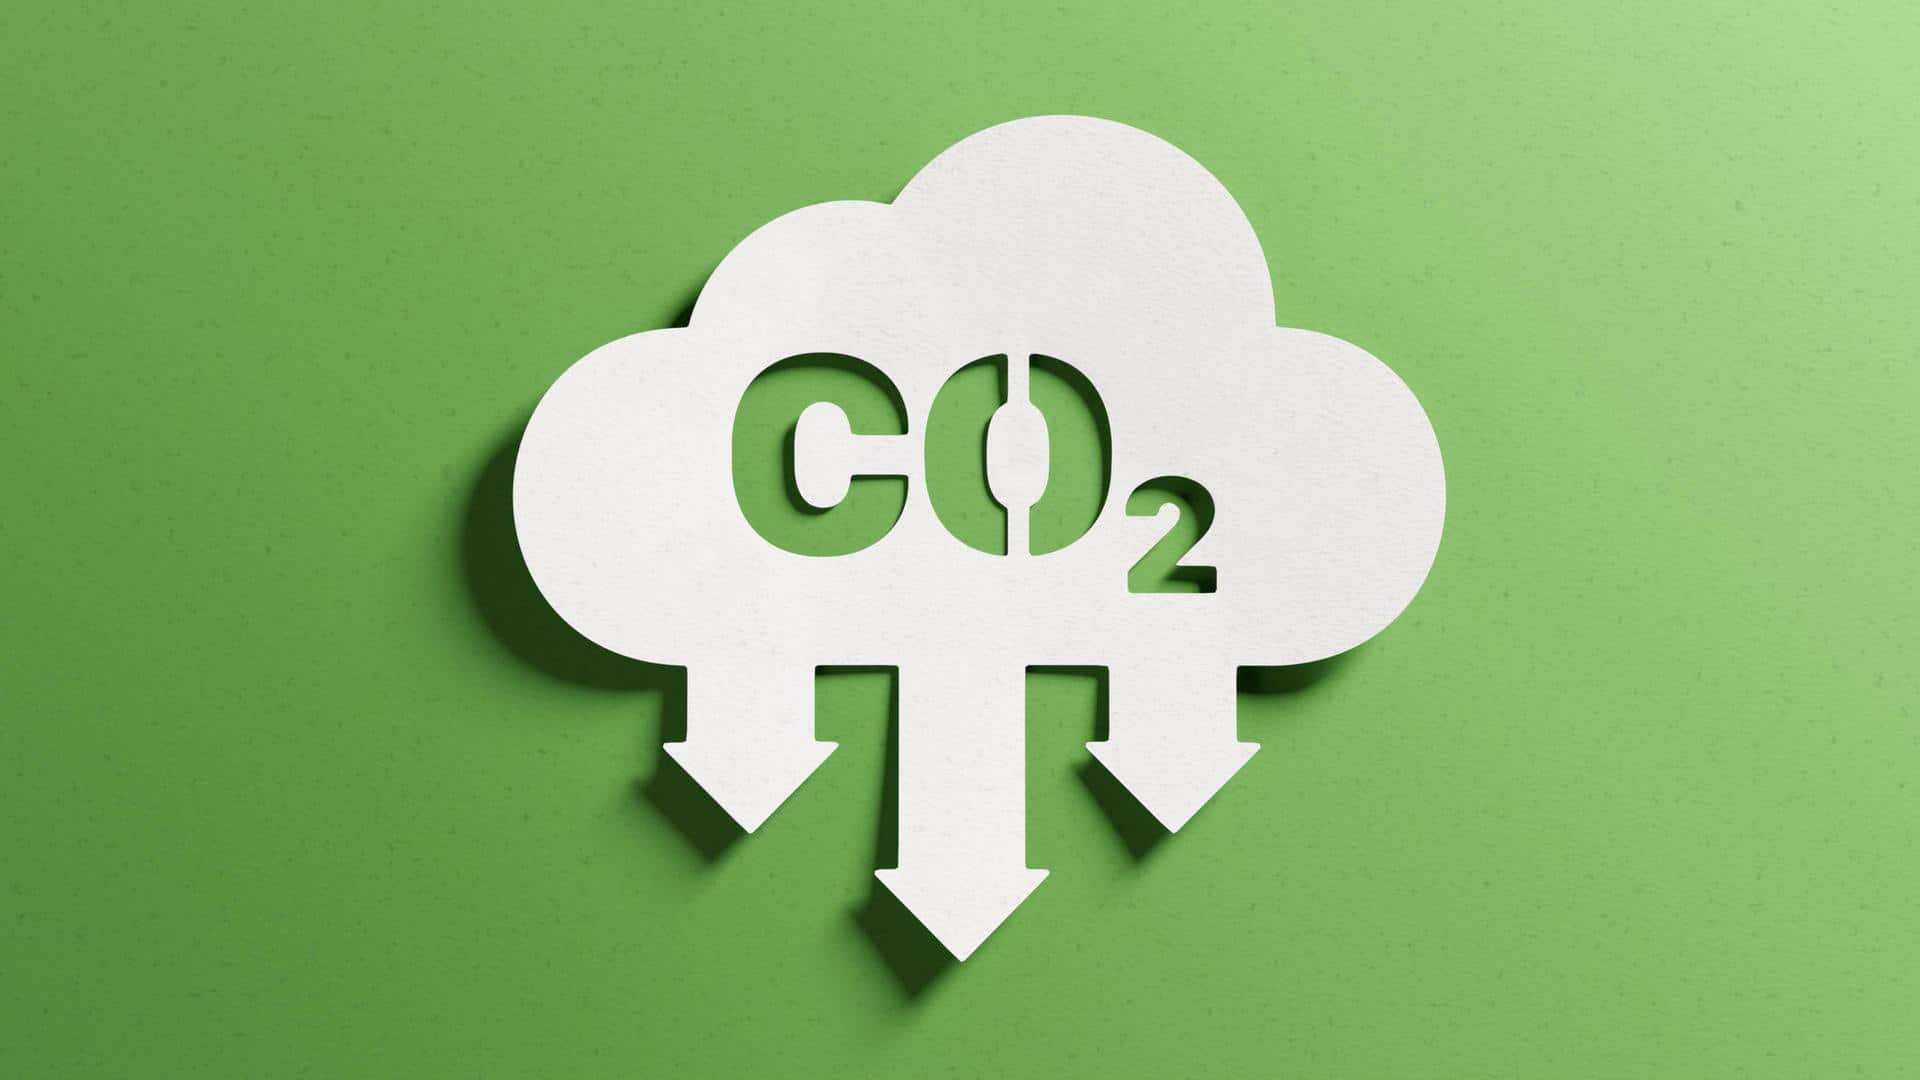 Five simple ways to reduce your carbon footprint